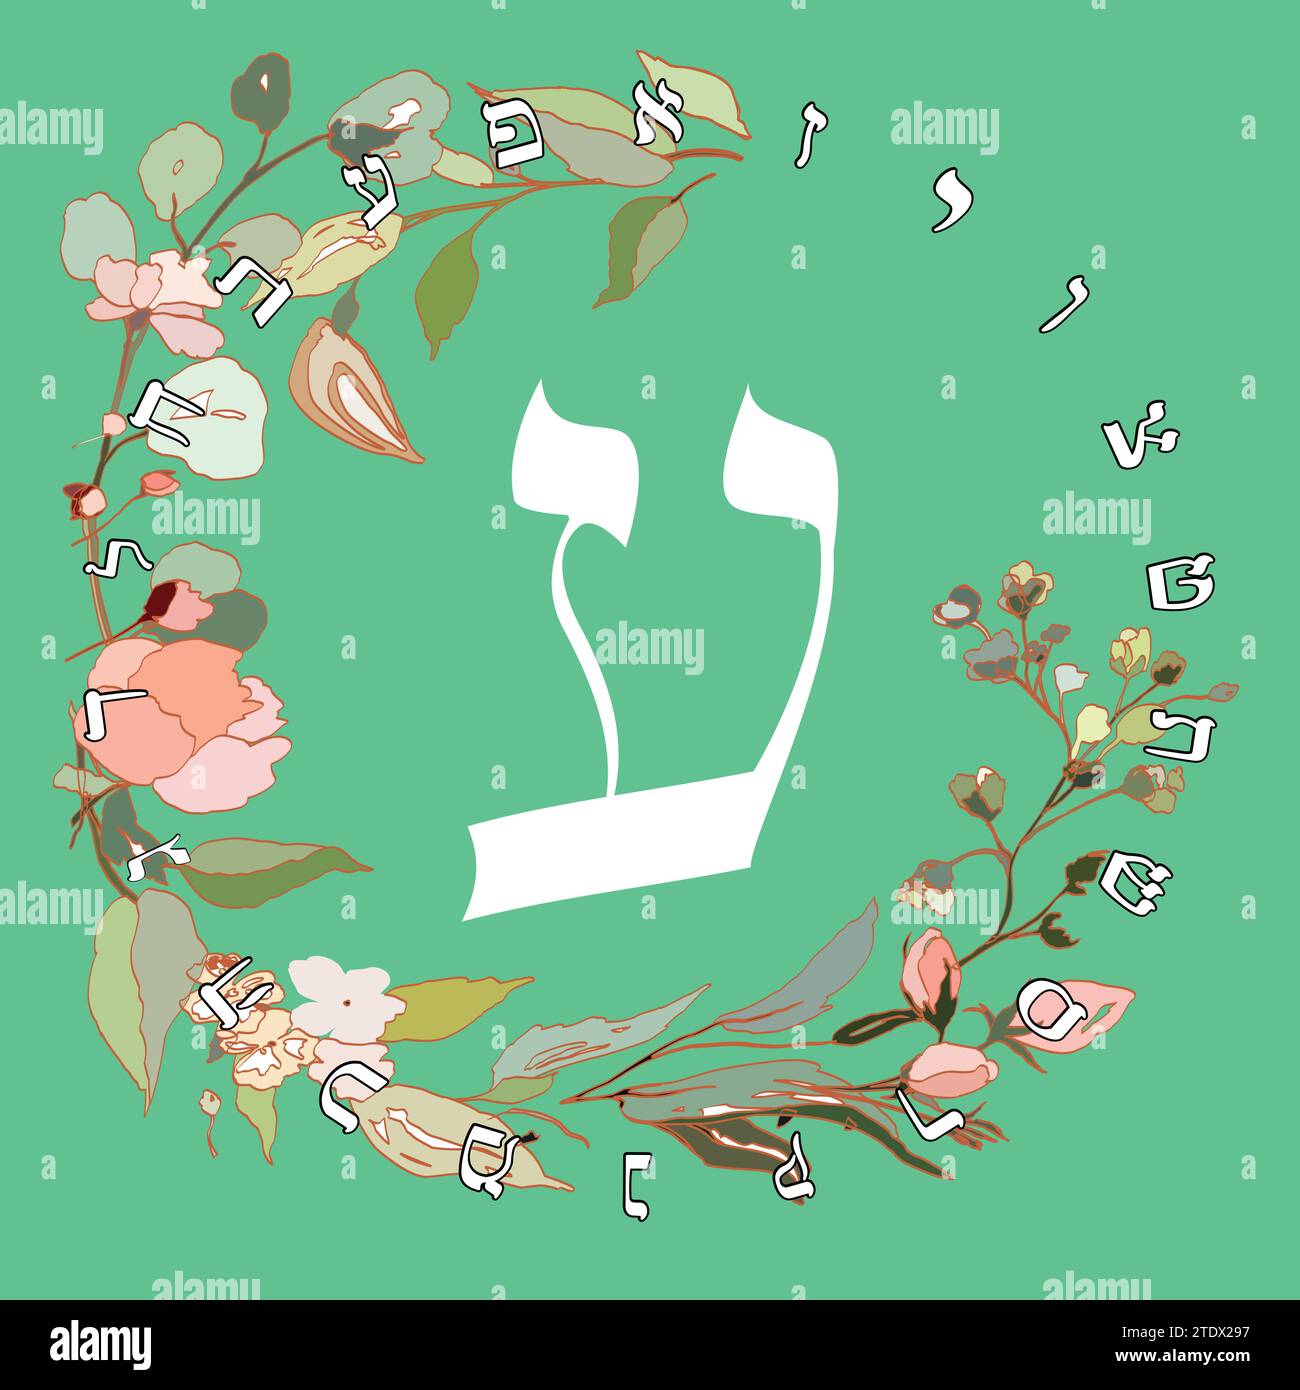 Vector illustration of the Hebrew alphabet with floral design. Hebrew letter called Ayin white on green background. Stock Vector